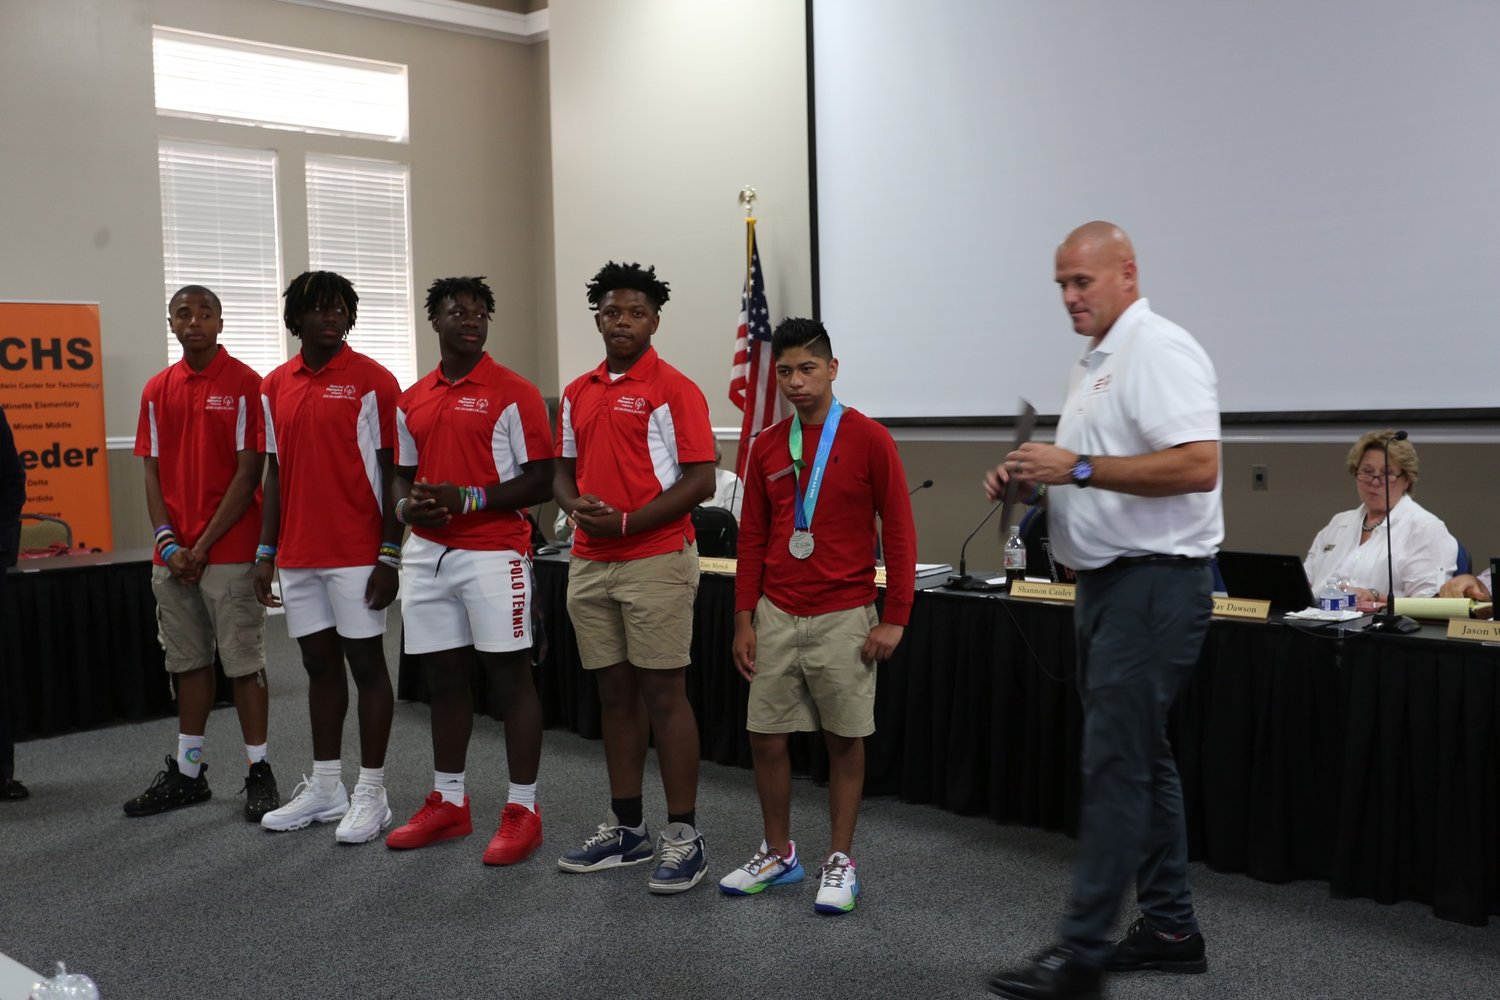 Baldwin County Schools’ Unified Flag Football team, the Baldwin Bandits, claimed silver medals at the USA Games in Orlando earlier this month. Coach Shawn O'Connor and team captains joined the team in being honored at the June 23 meeting of the Baldwin County Board of Education.